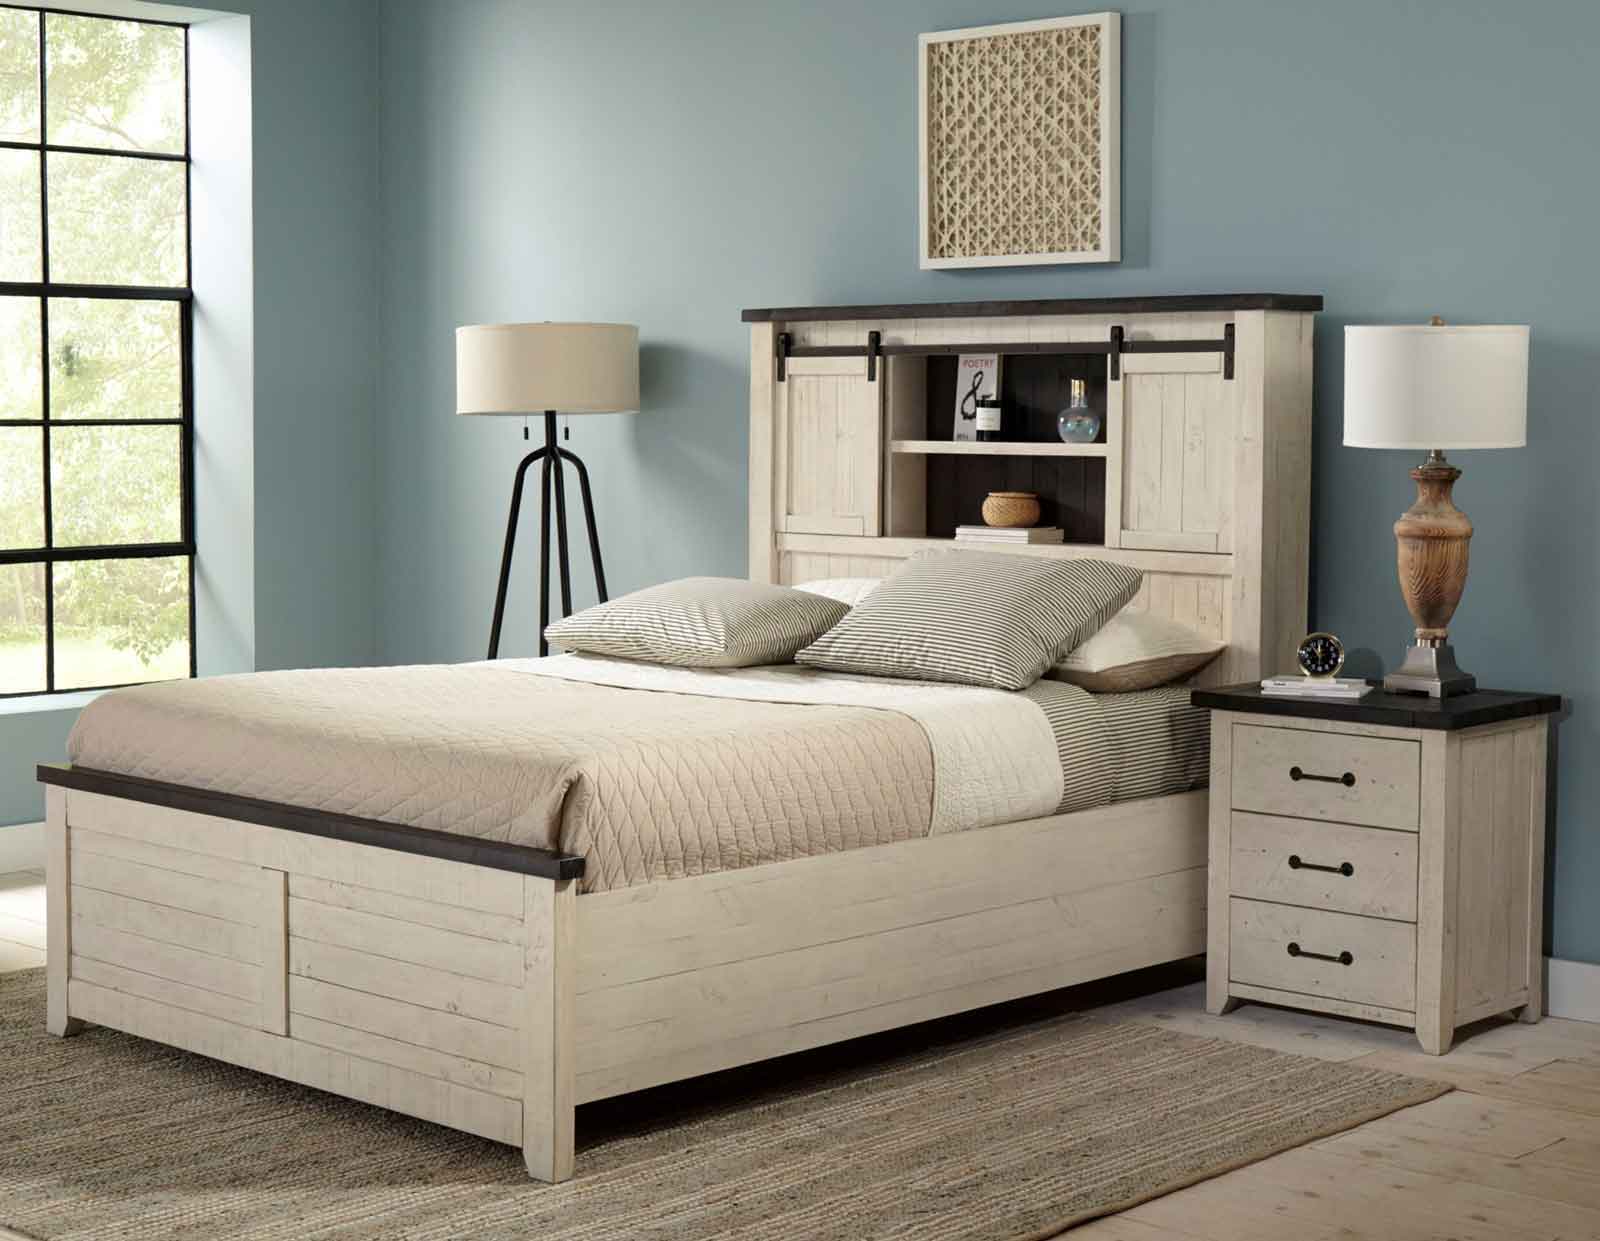 The Madison County Bedroom Suite Product Review